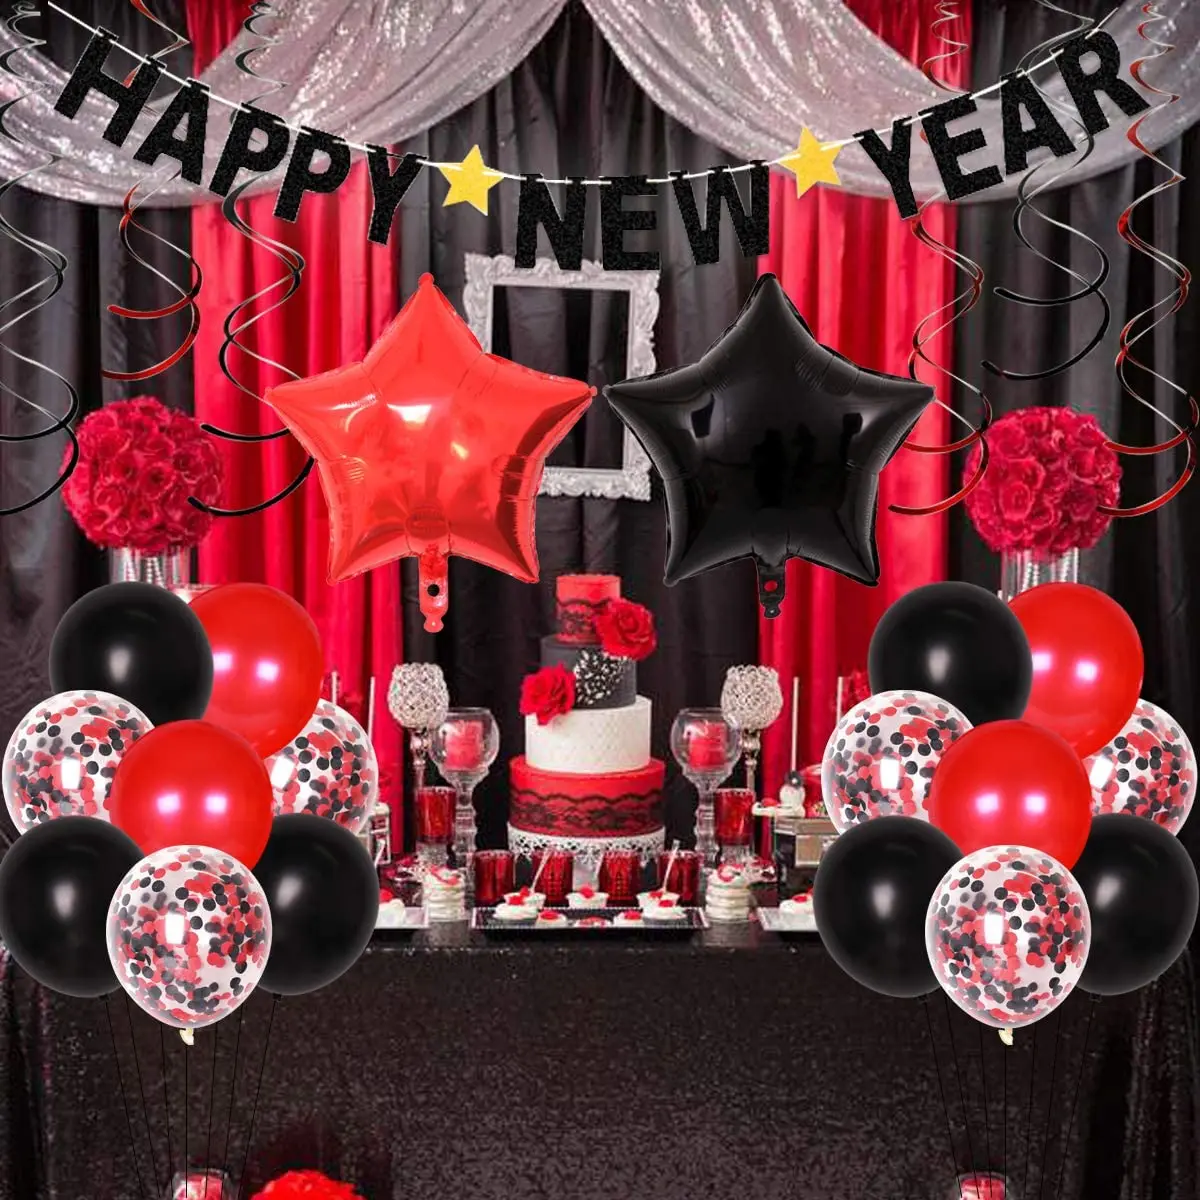 

Red Black New Year Eve Party Decorations Supplies Balloon Set with Star 2022 Foil Balloon Happy New Year Banner Hanging Swirls